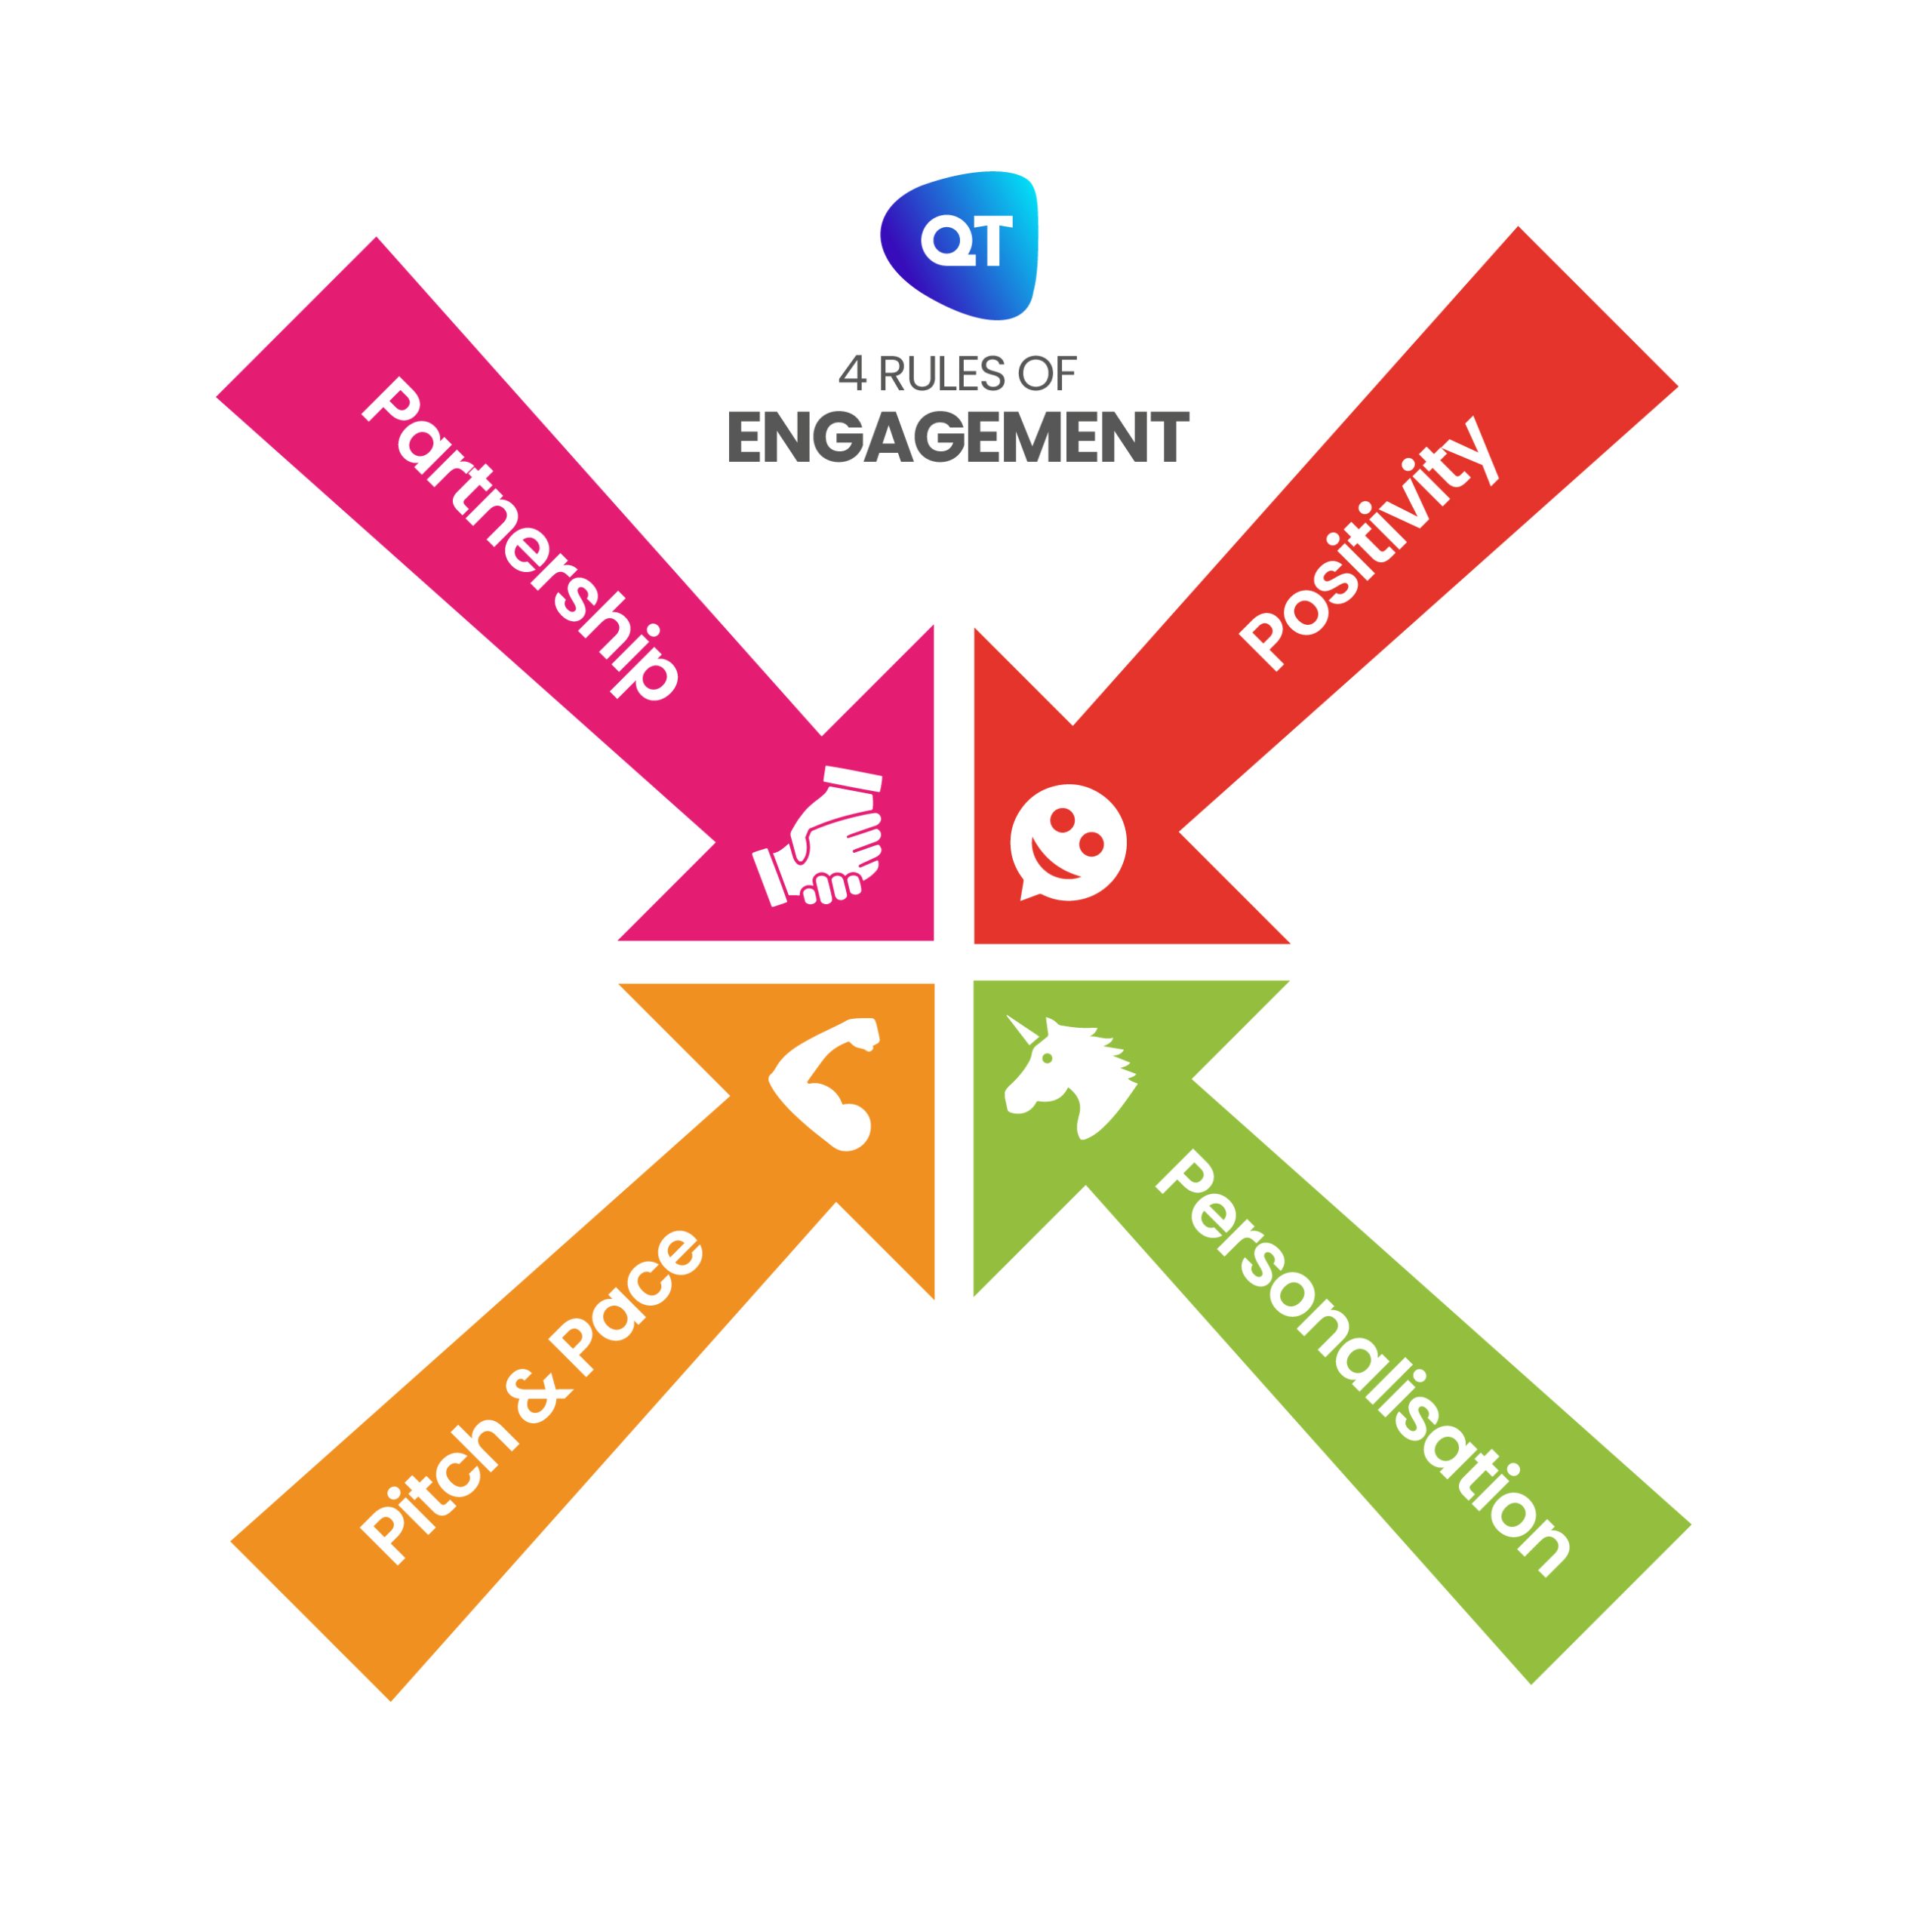 4 Simple Strategies to Build Engagement